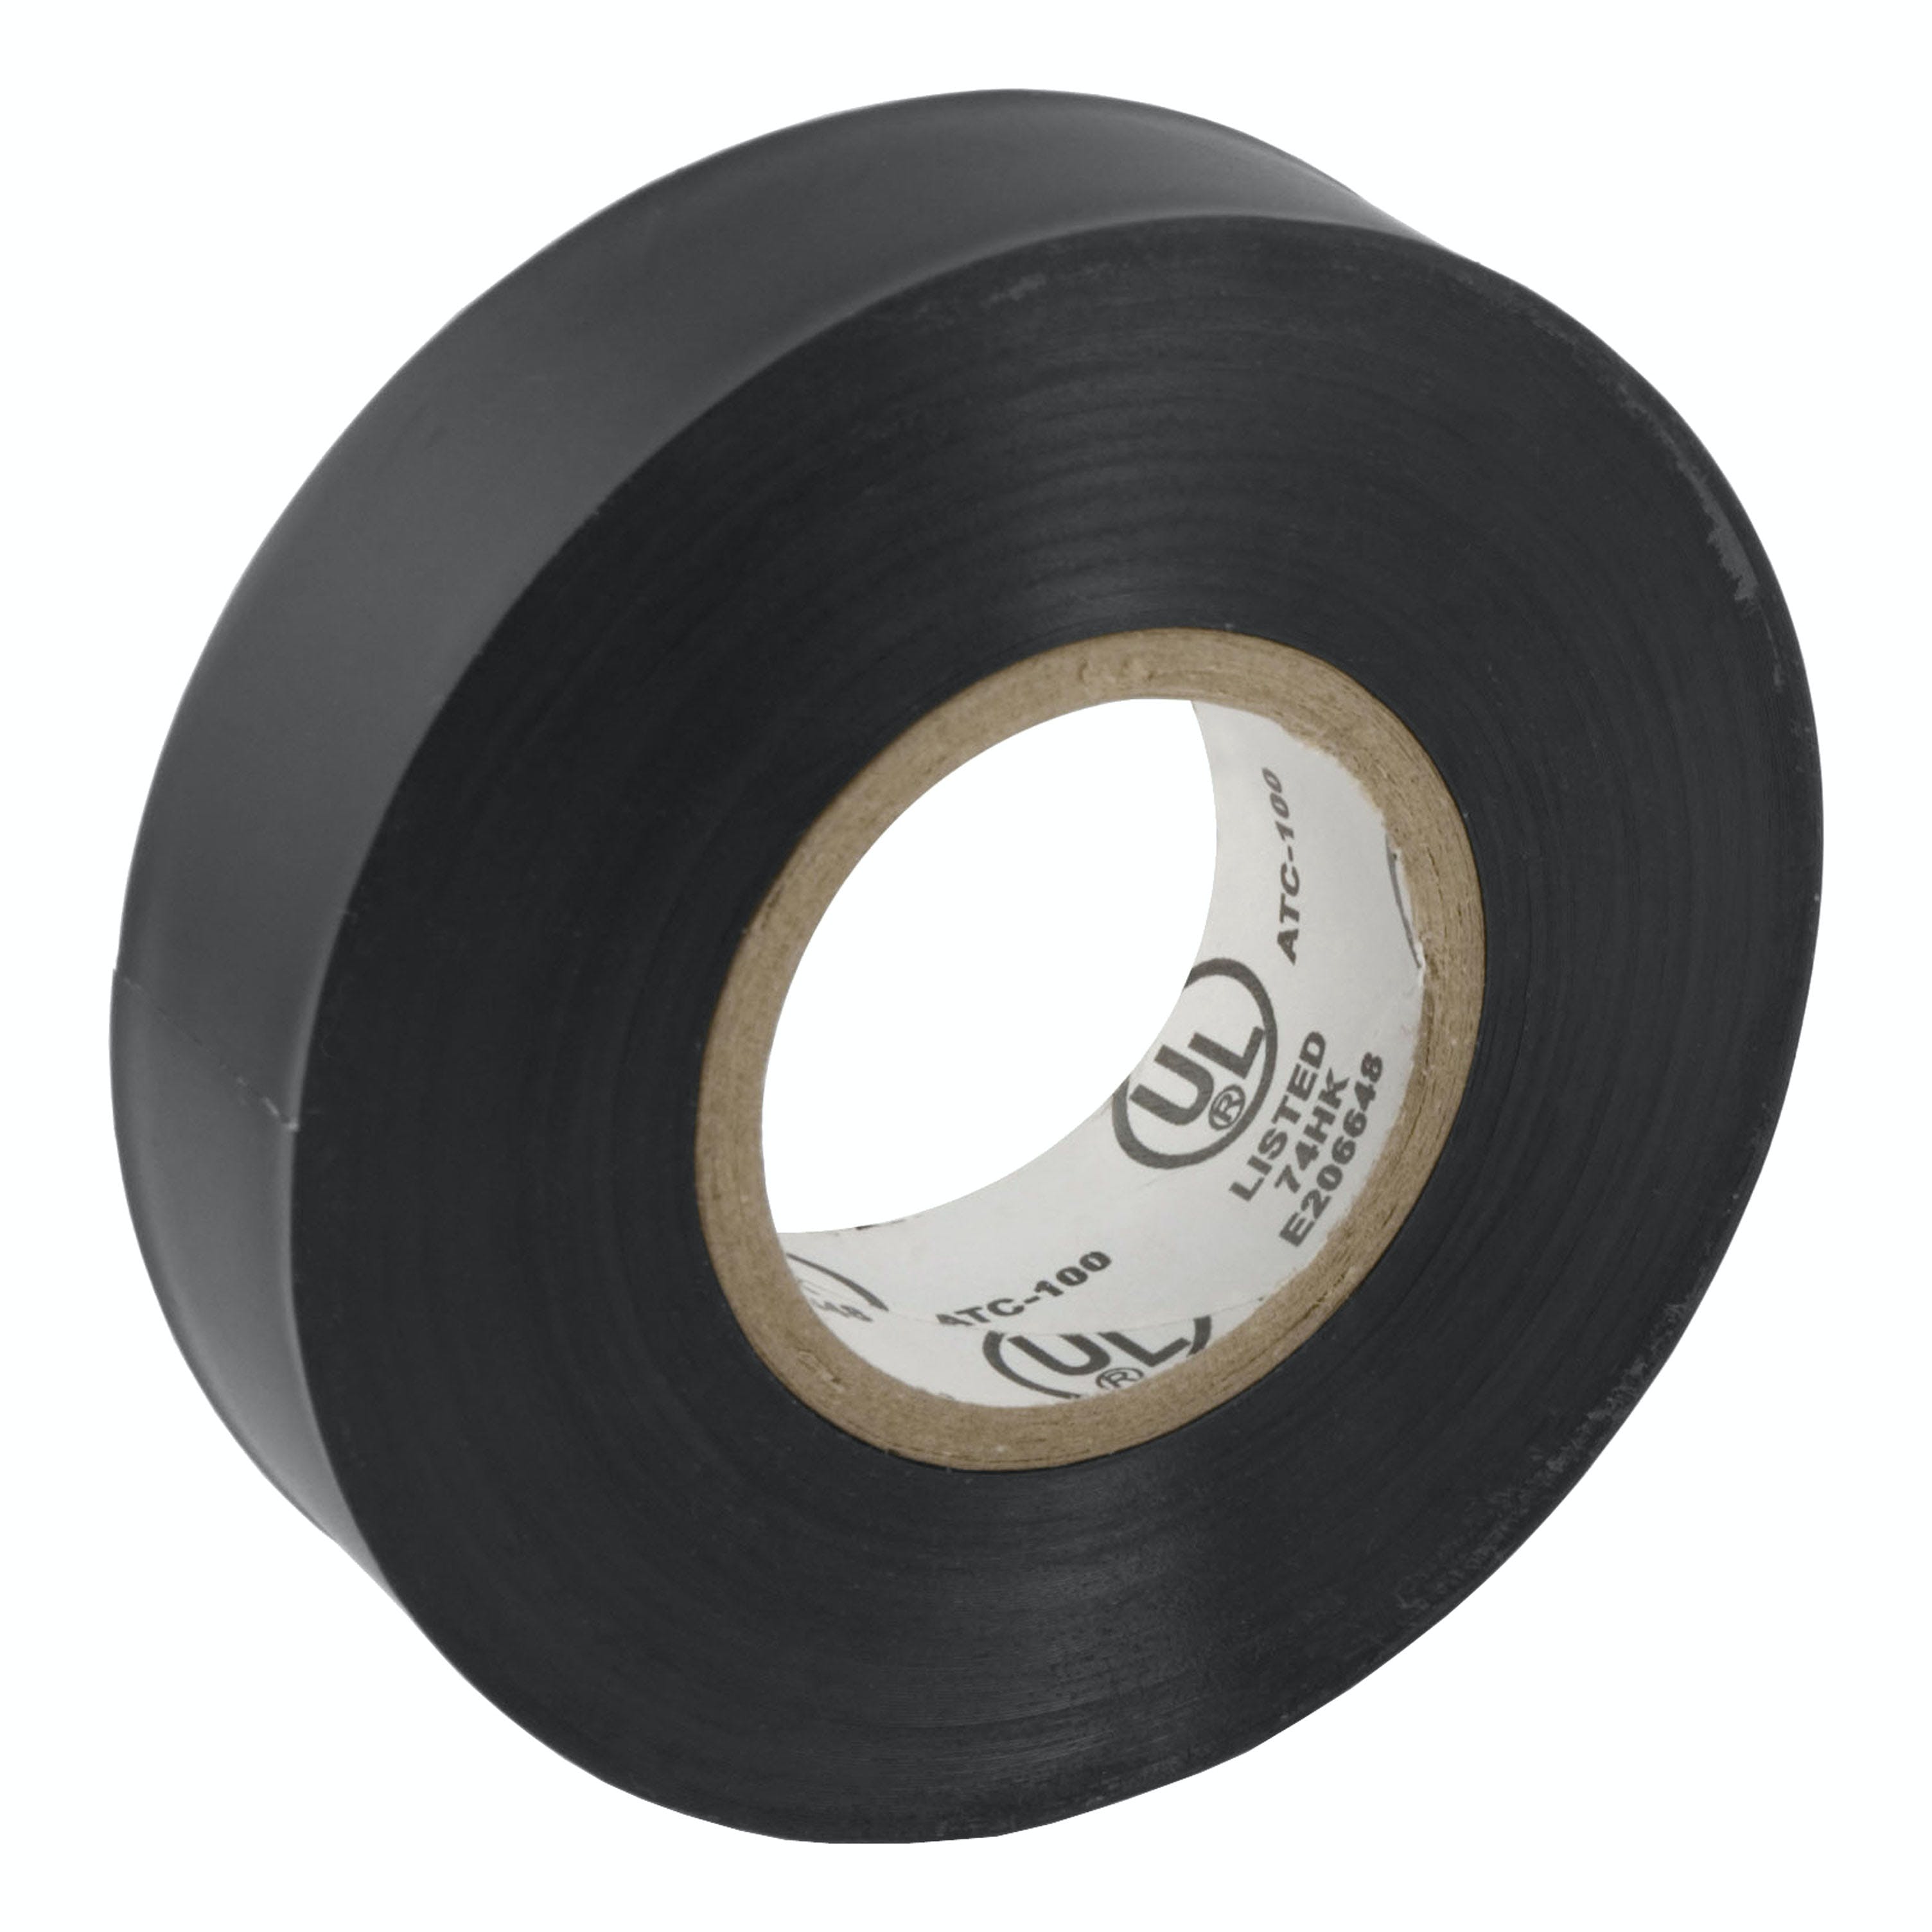 CURT 59740 3/4 Electrical Tape (60' Rolls, 10-Pack)